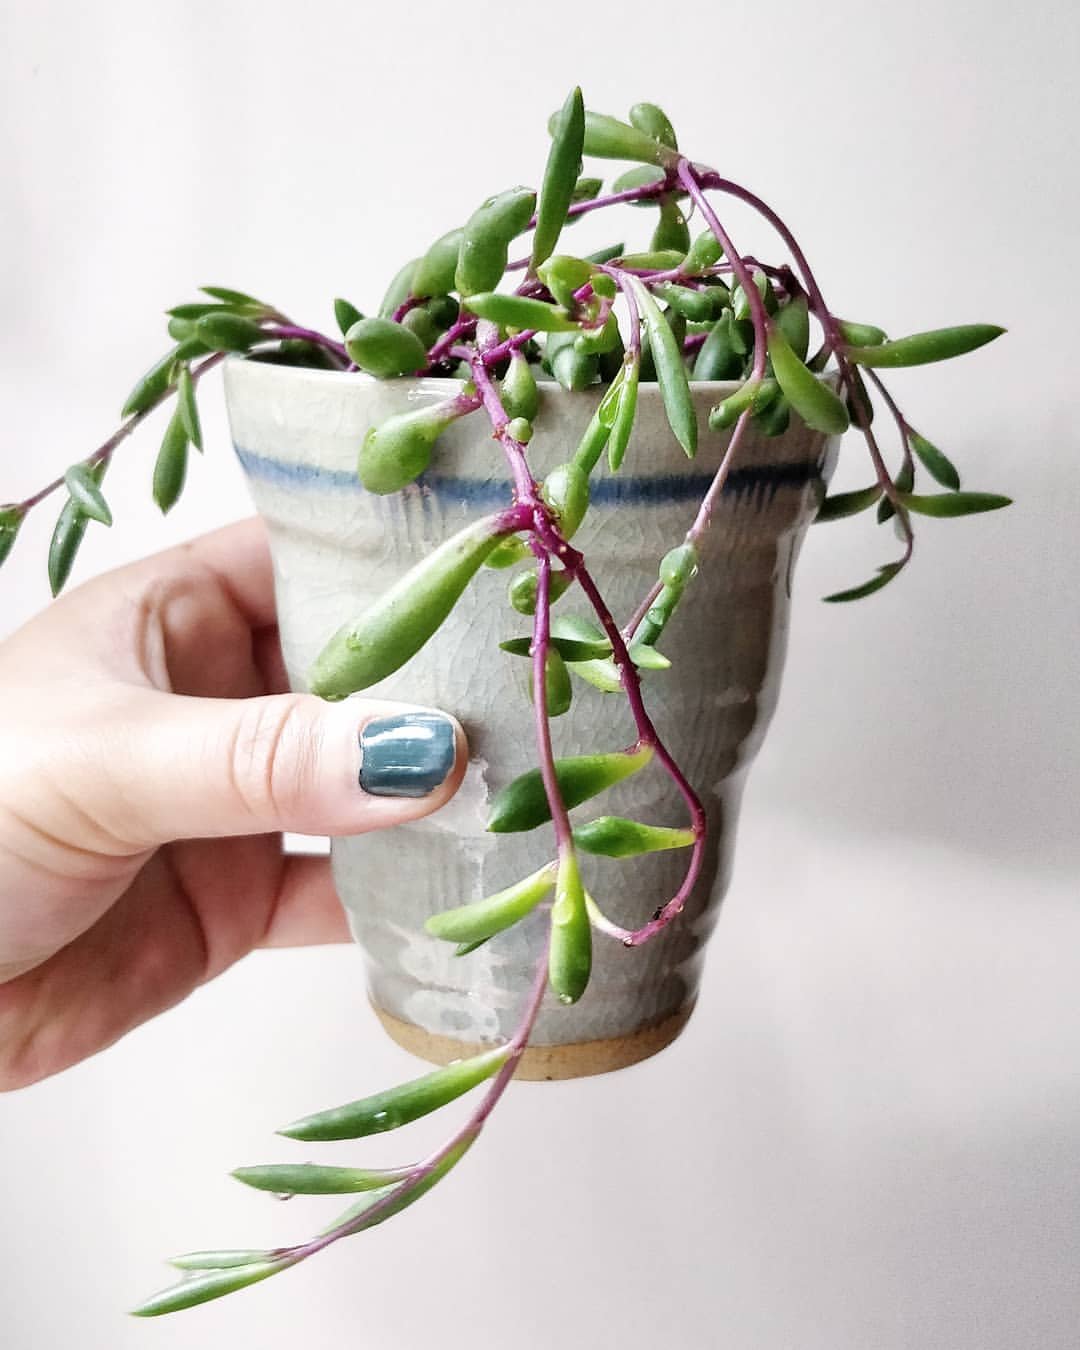 A person gently holds a small plant in a pot. The plant is a String of Pickles (Senecio rowleyanus 'Bean Pickleplant').

